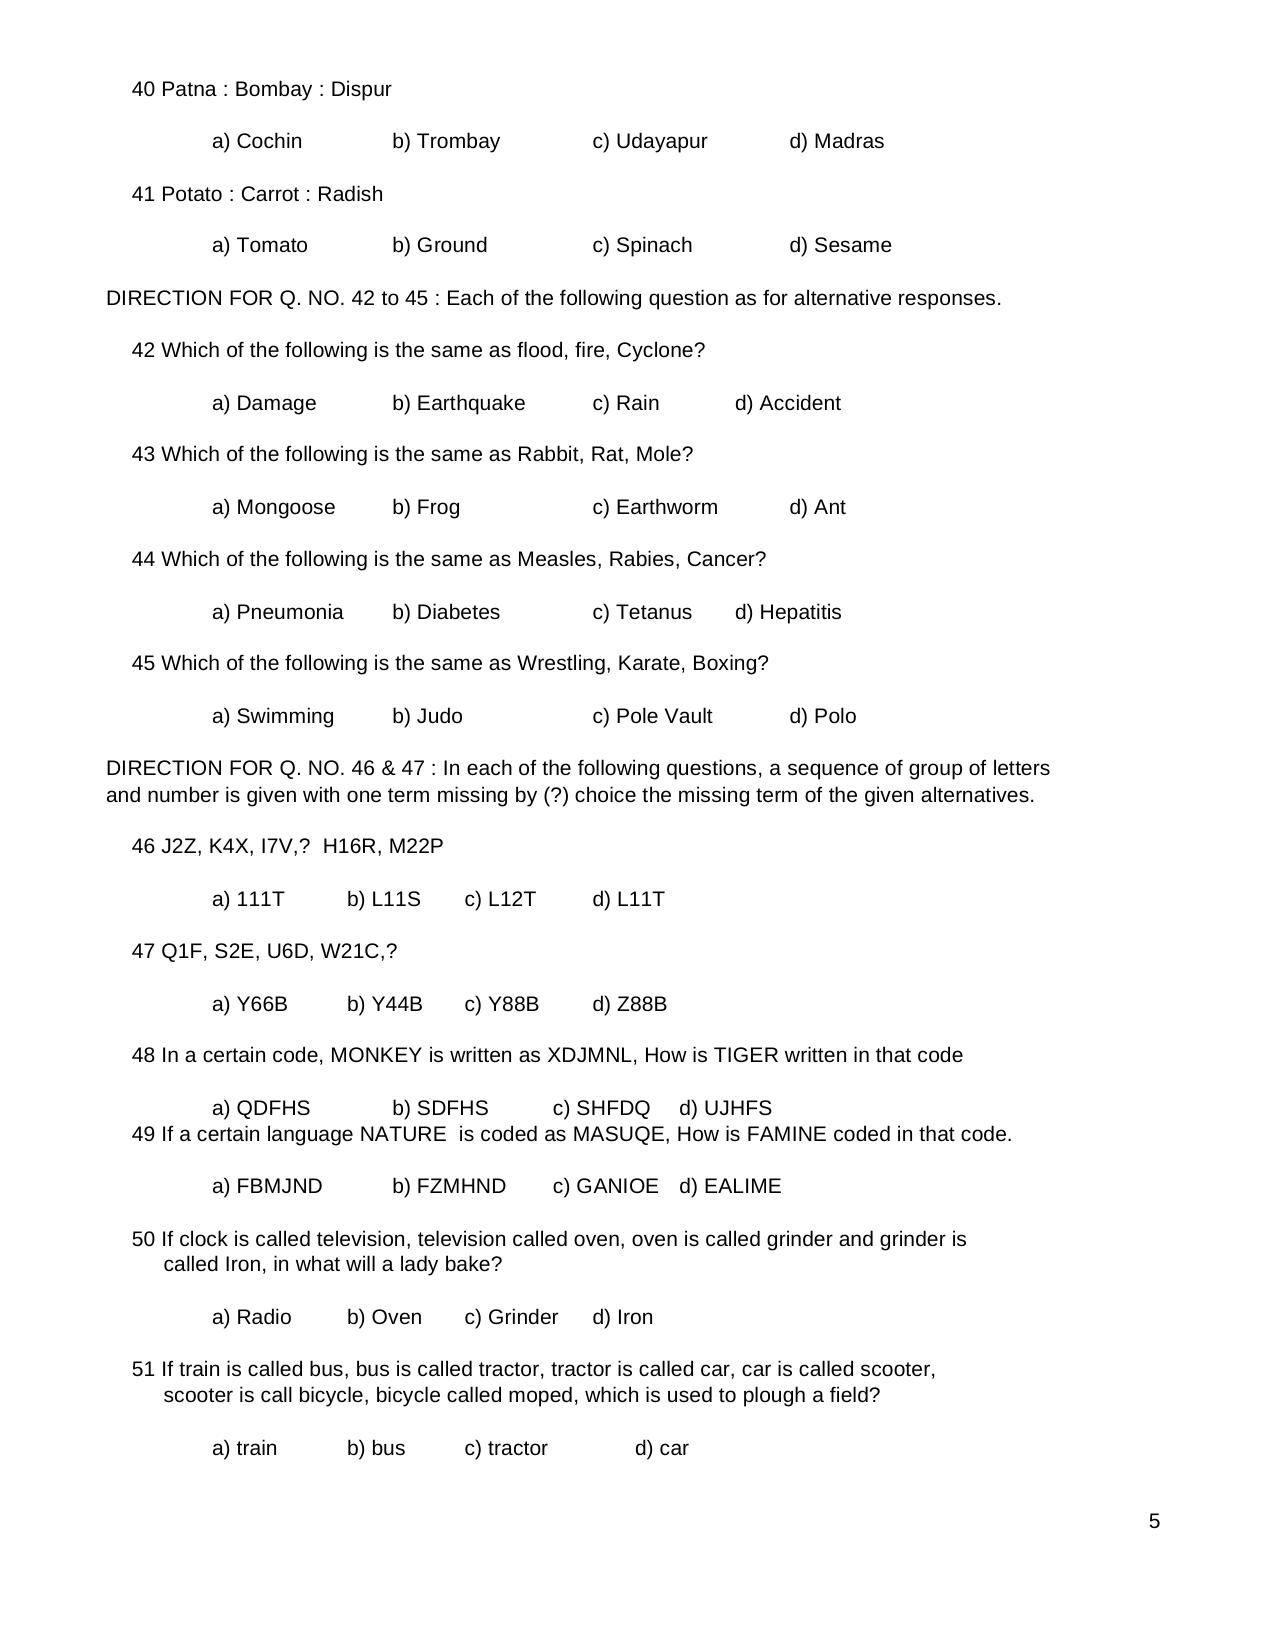 TNPSC Assistant System Engineer Sample Papers Numerical Ability - Page 5